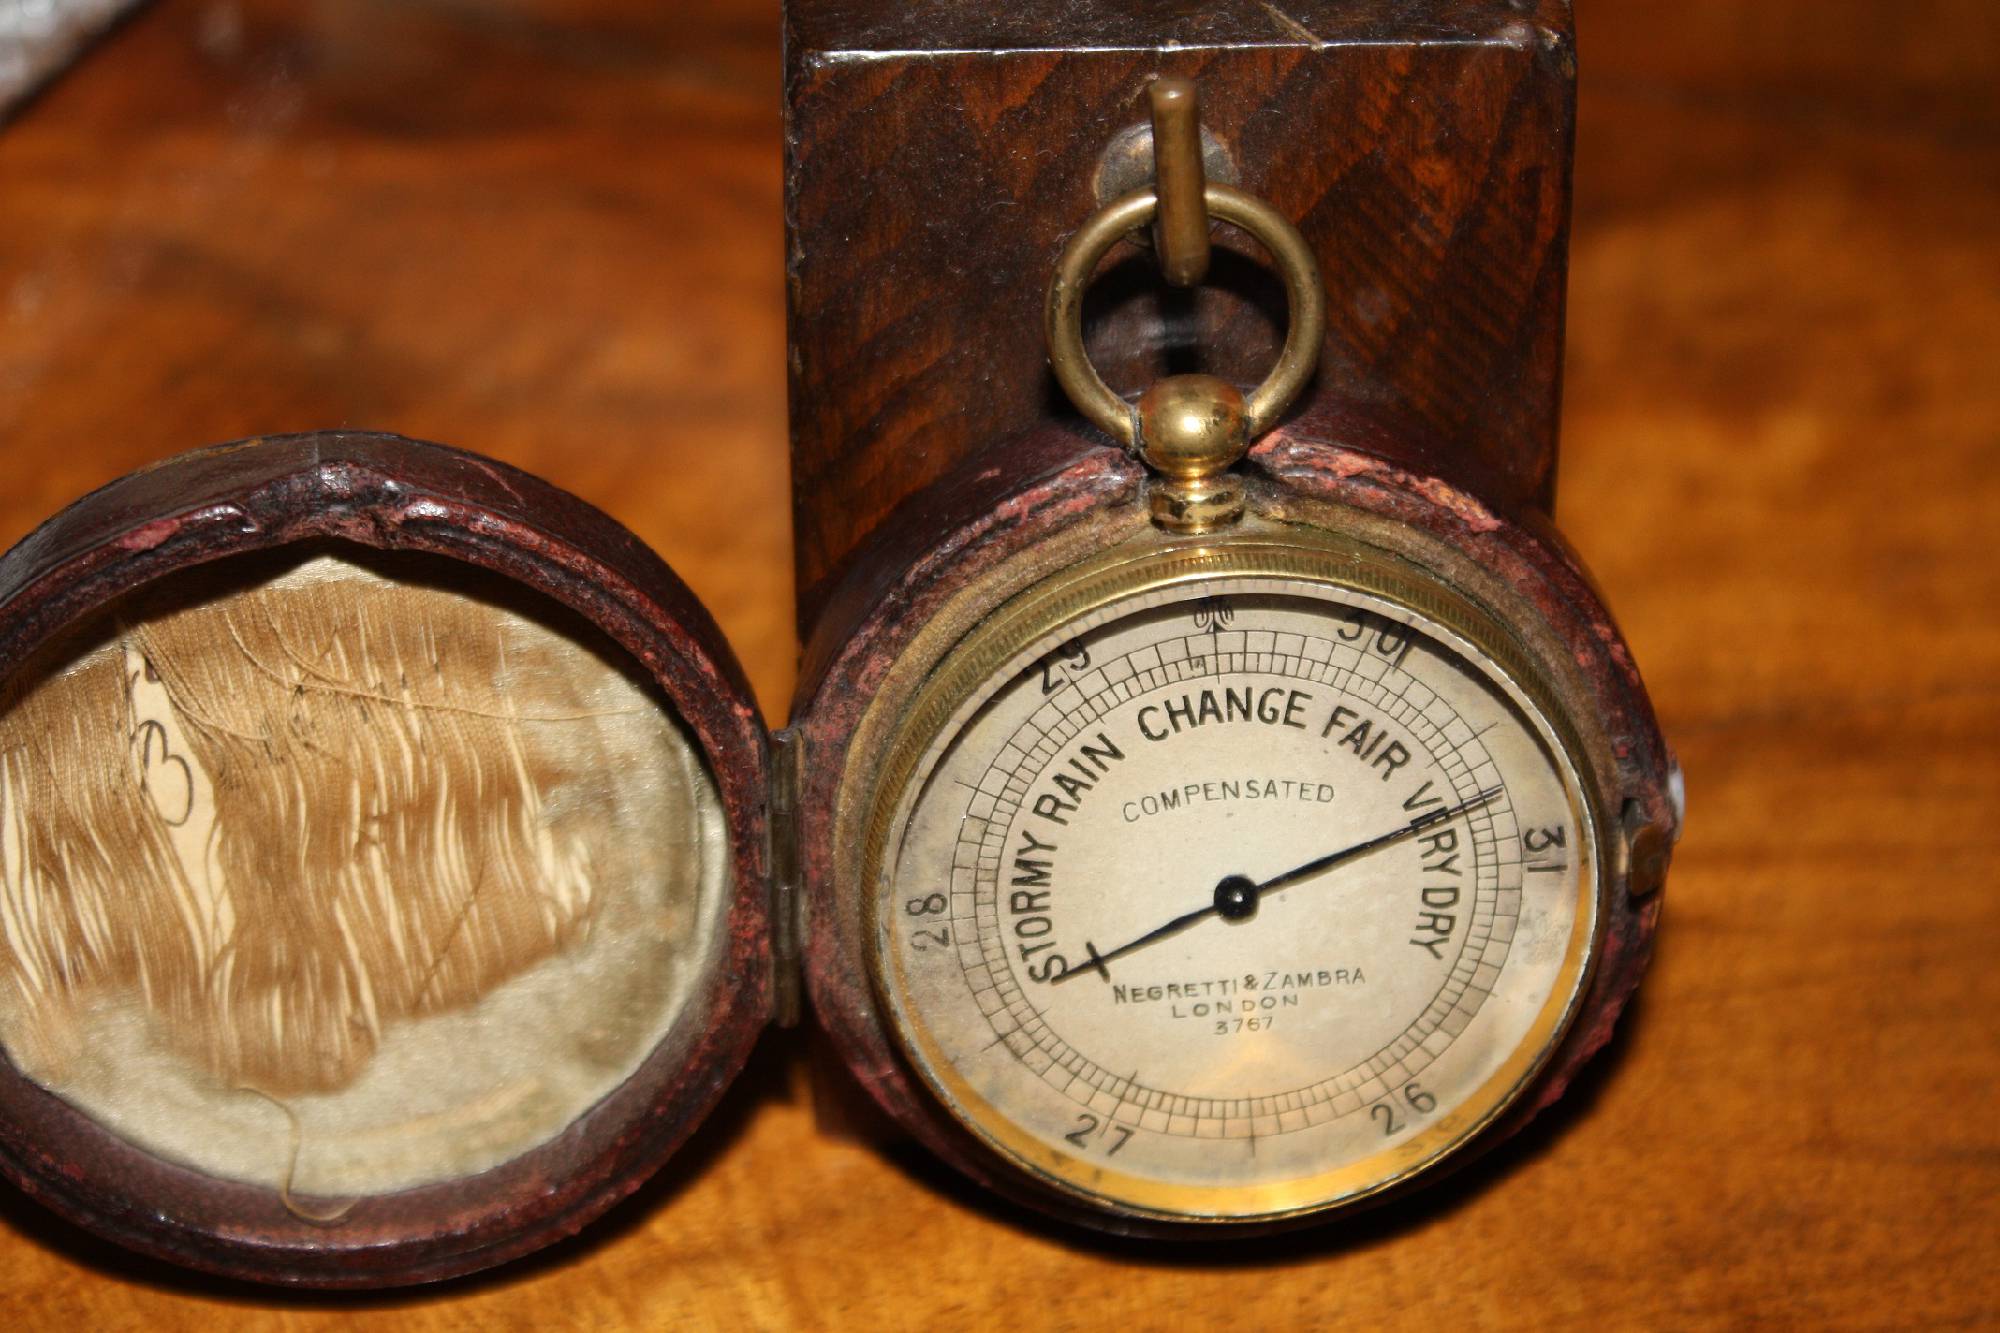 Small antique English travel-size brass barometer in a leather case, made by 'Negretti & Zambra', London